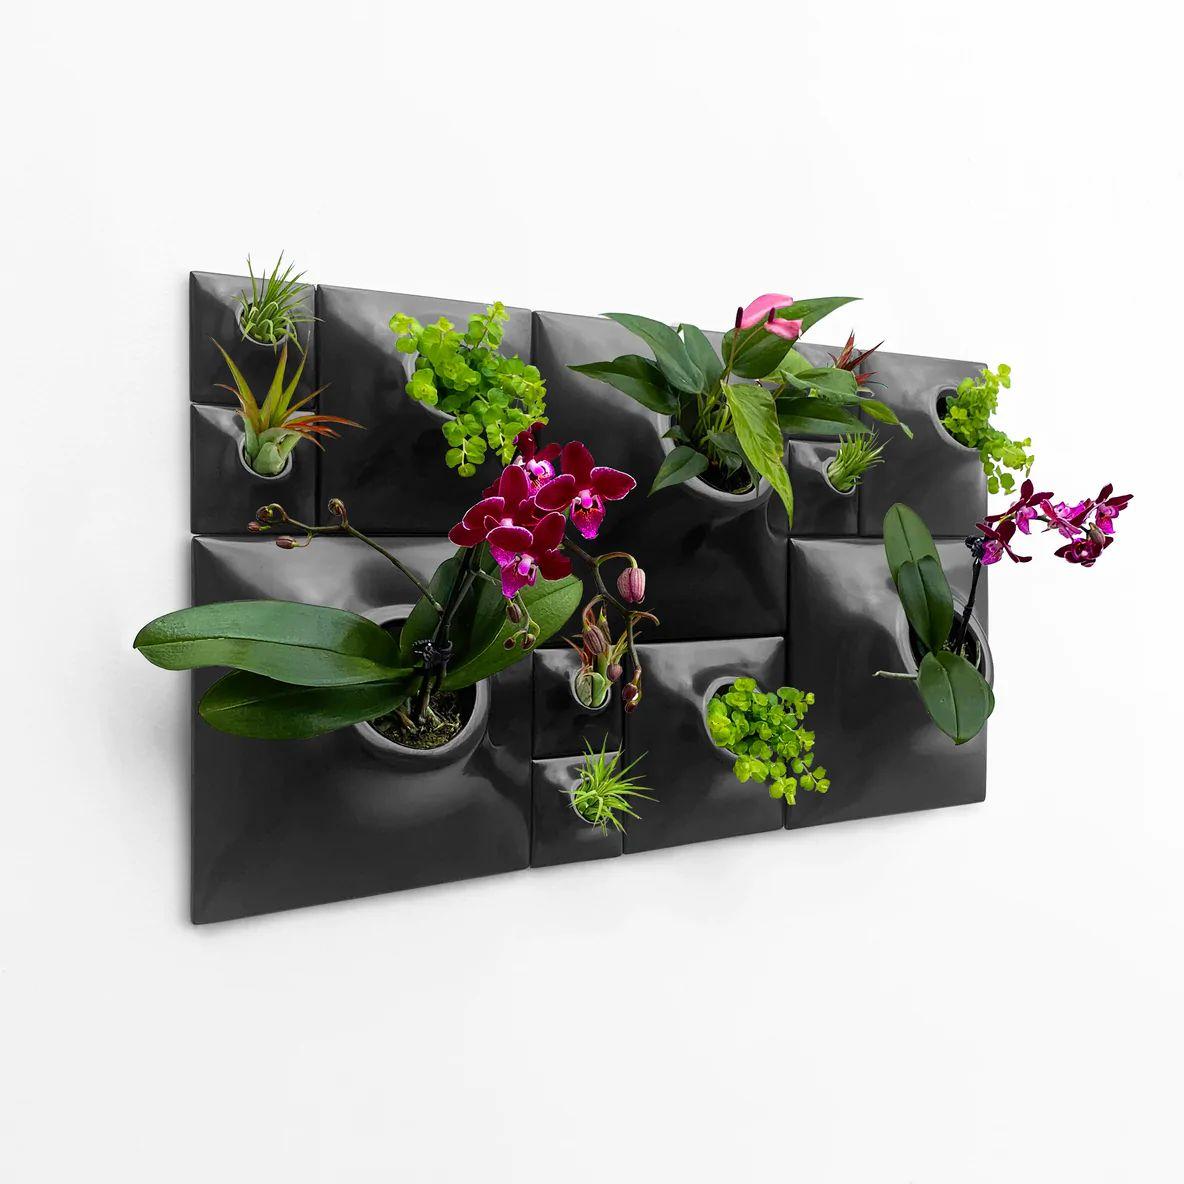 Modern Black Greenwall, Mid Century Modern Wall Decor, Moss Wall Art, Node BS3

Transform your modern interior design into an exciting greenwall and epicenter of living wall art with this striking Node Wall Planter set. Let your eyes wander over